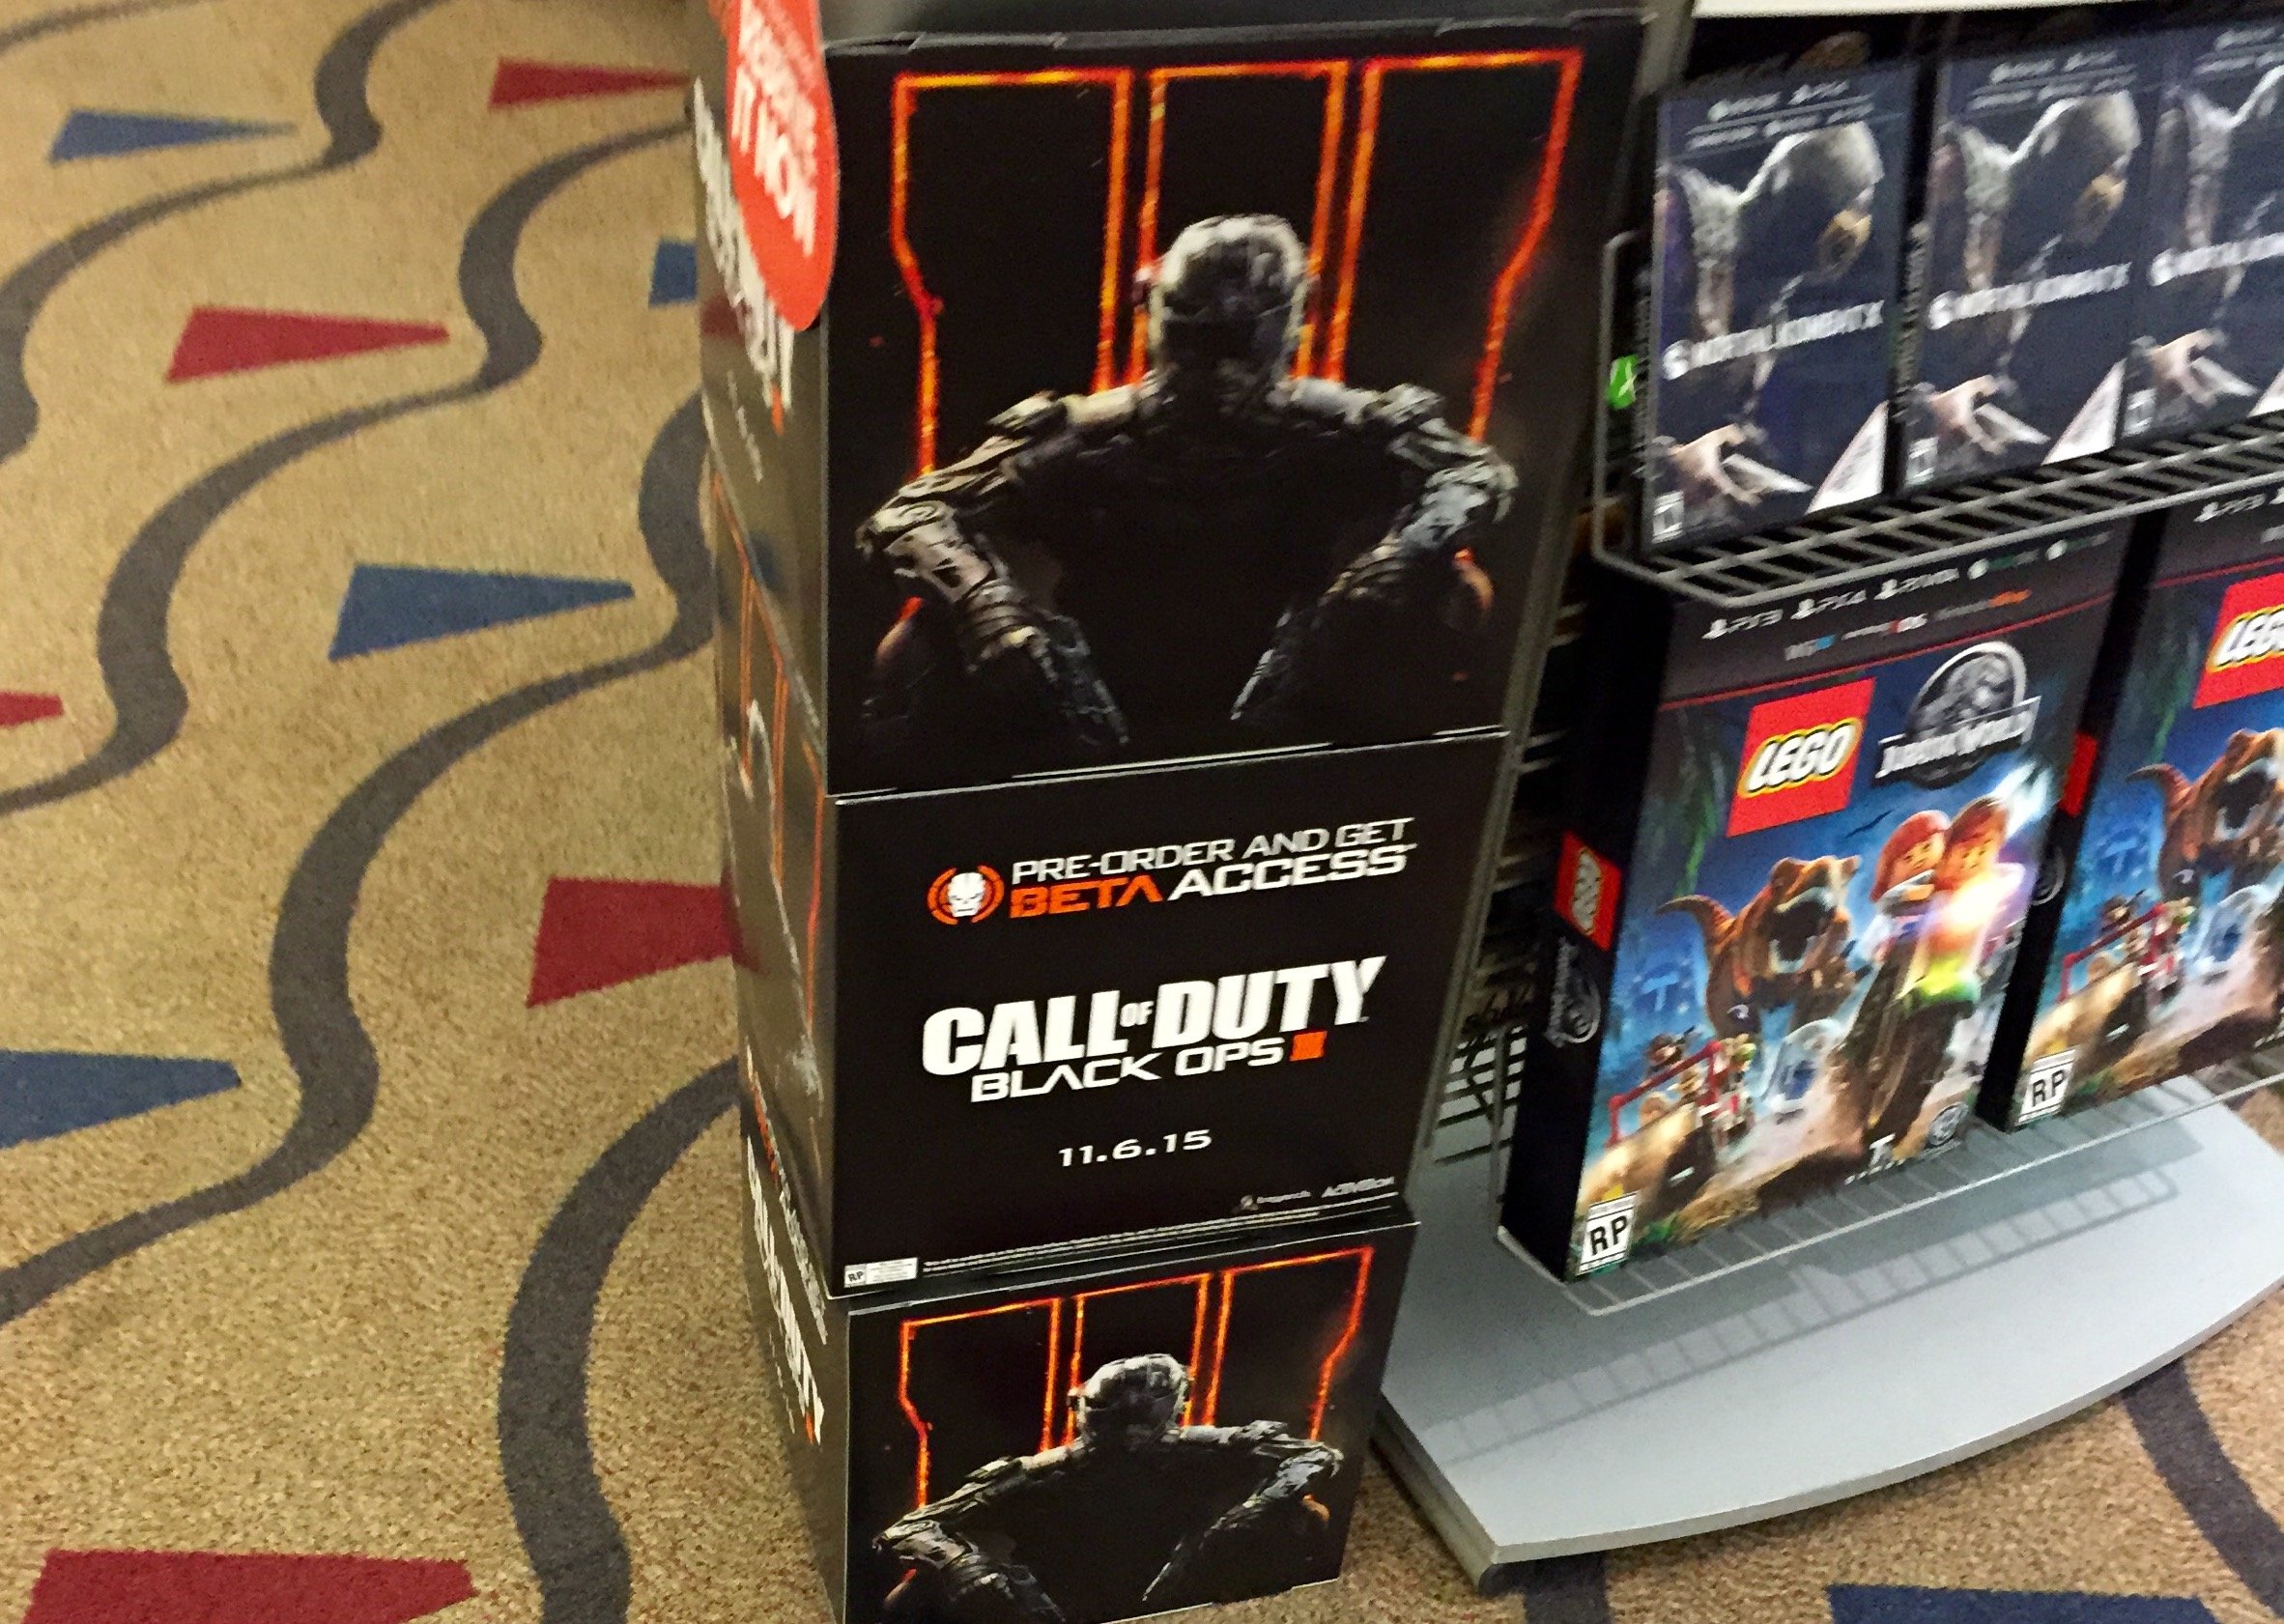 Save $22 with this early and long lasting Call of Duty: Black Ops 3 deal.